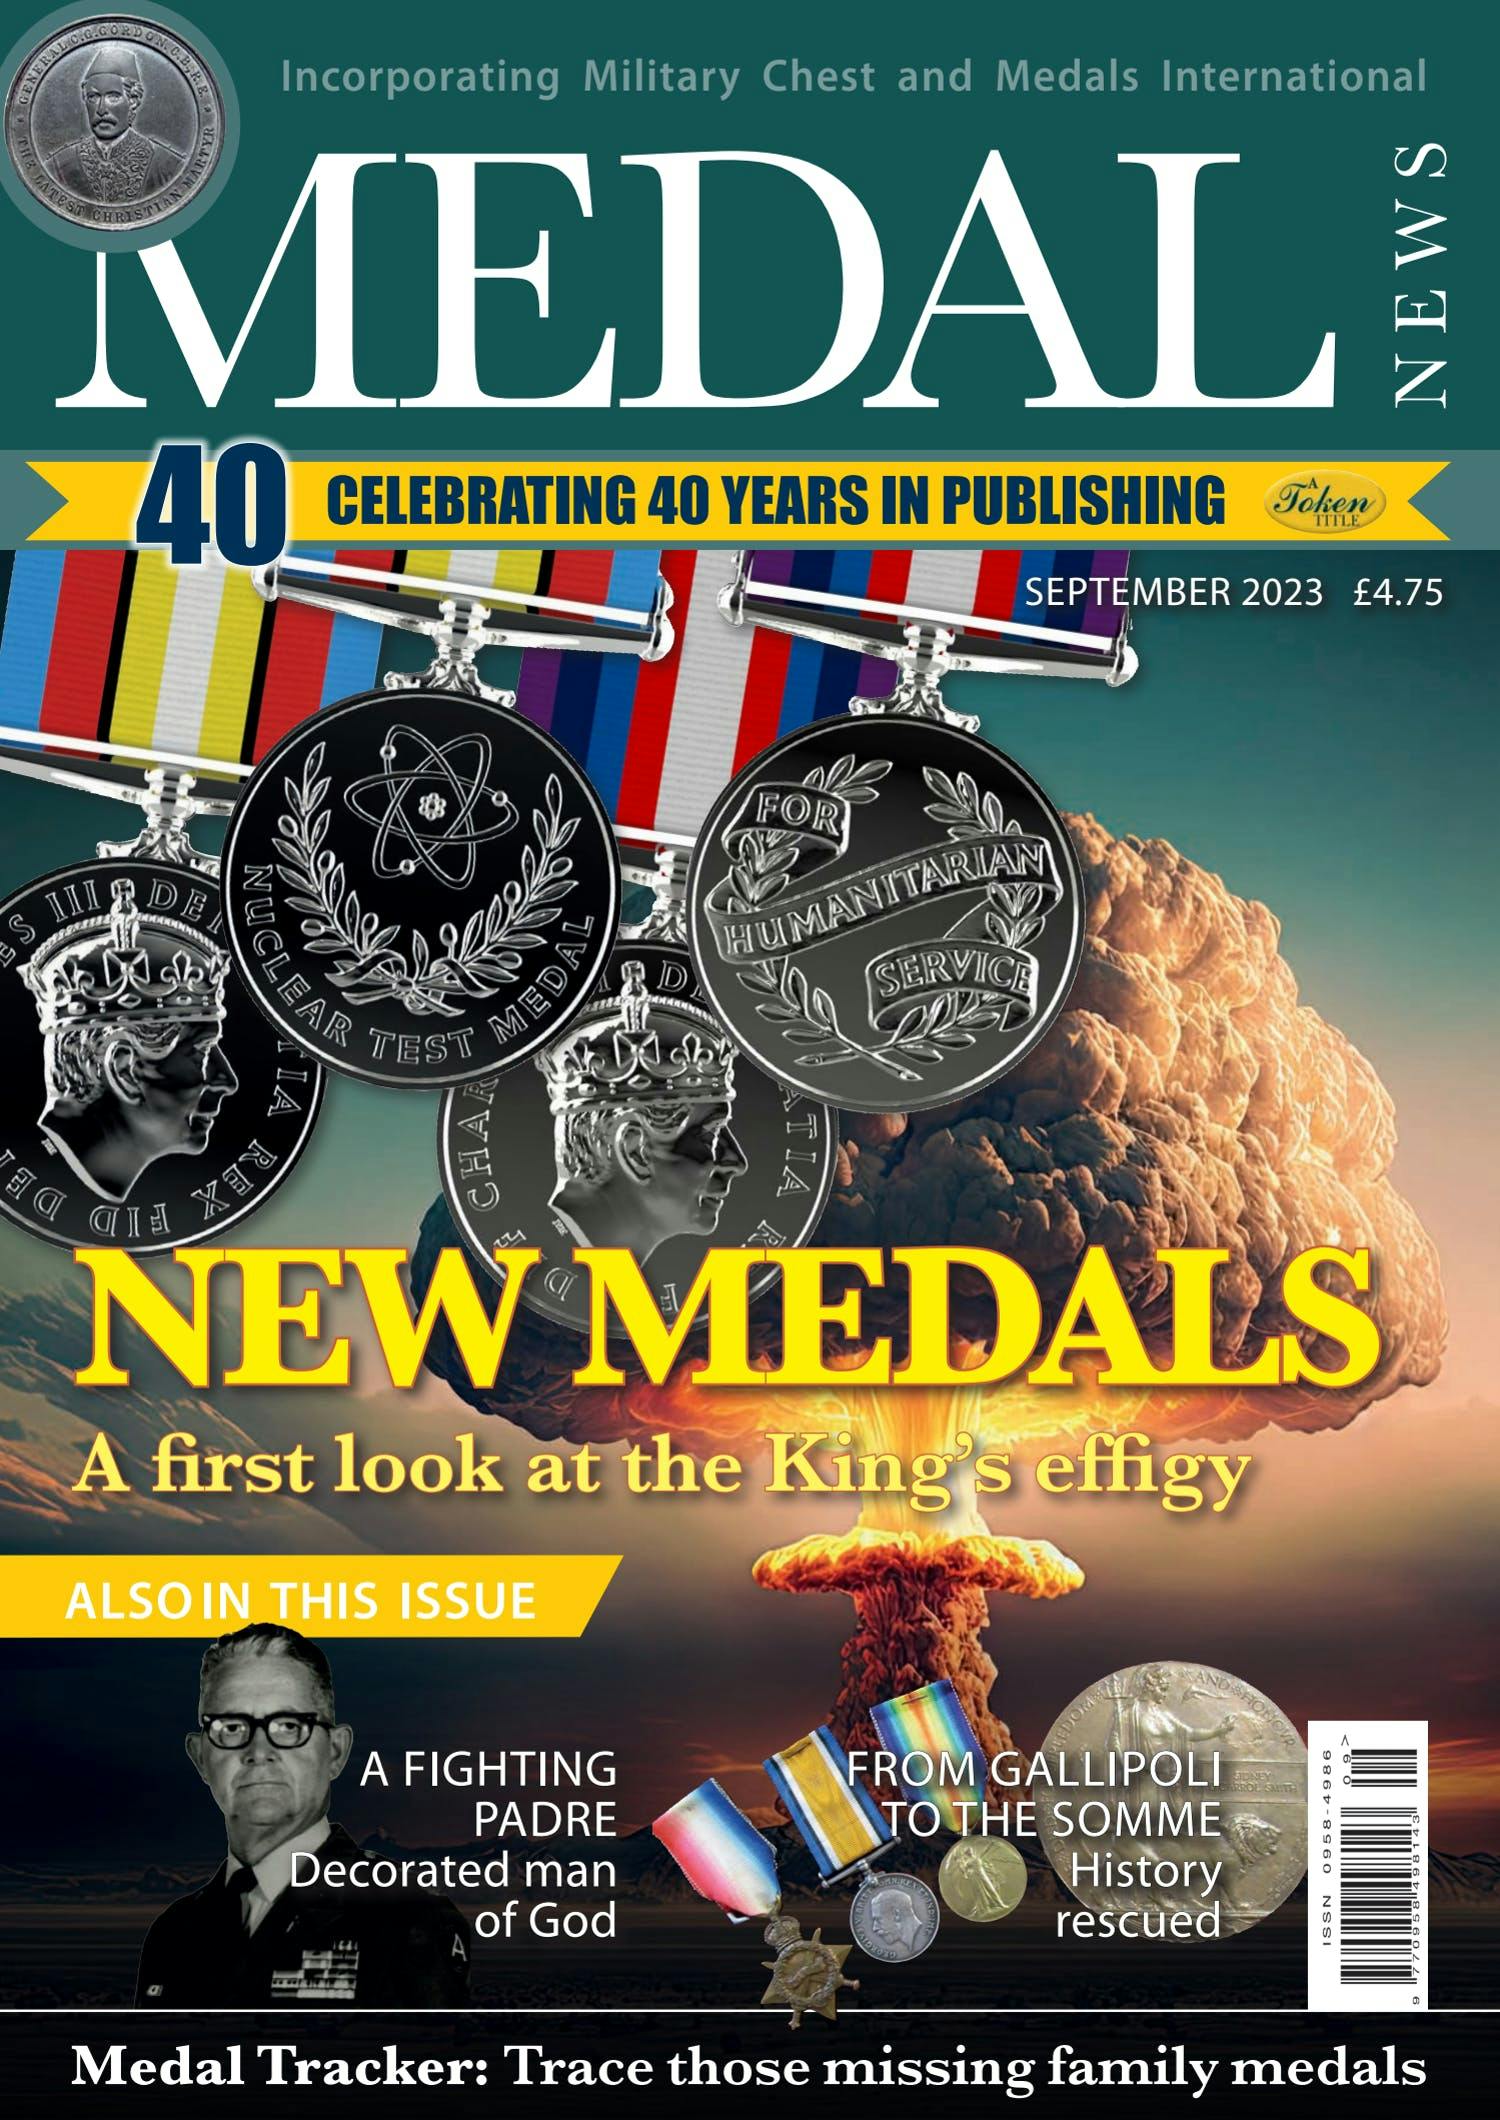 The front cover of Medal News, September 2023 - Volume 61, Number 8